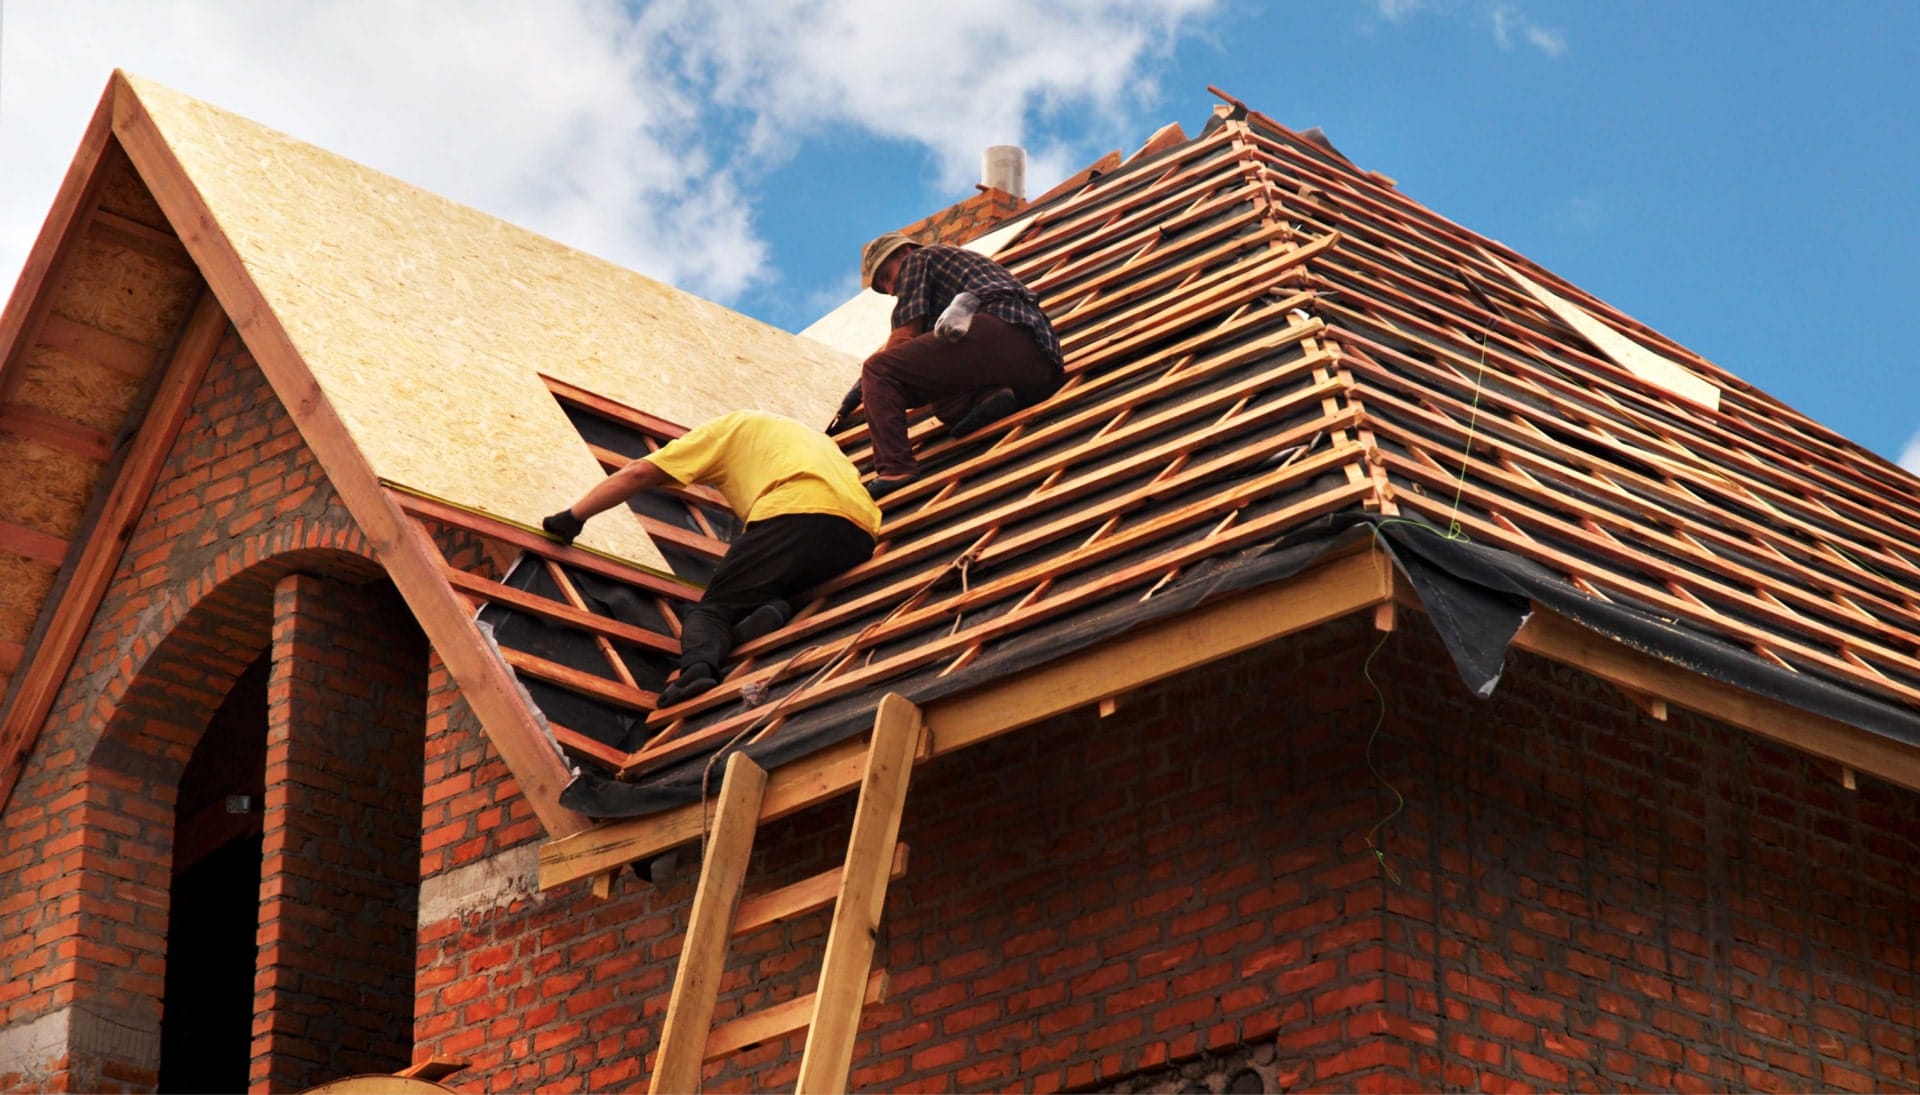 Trustworthy professional roofing services in San Diego, California with years of industry expertise.